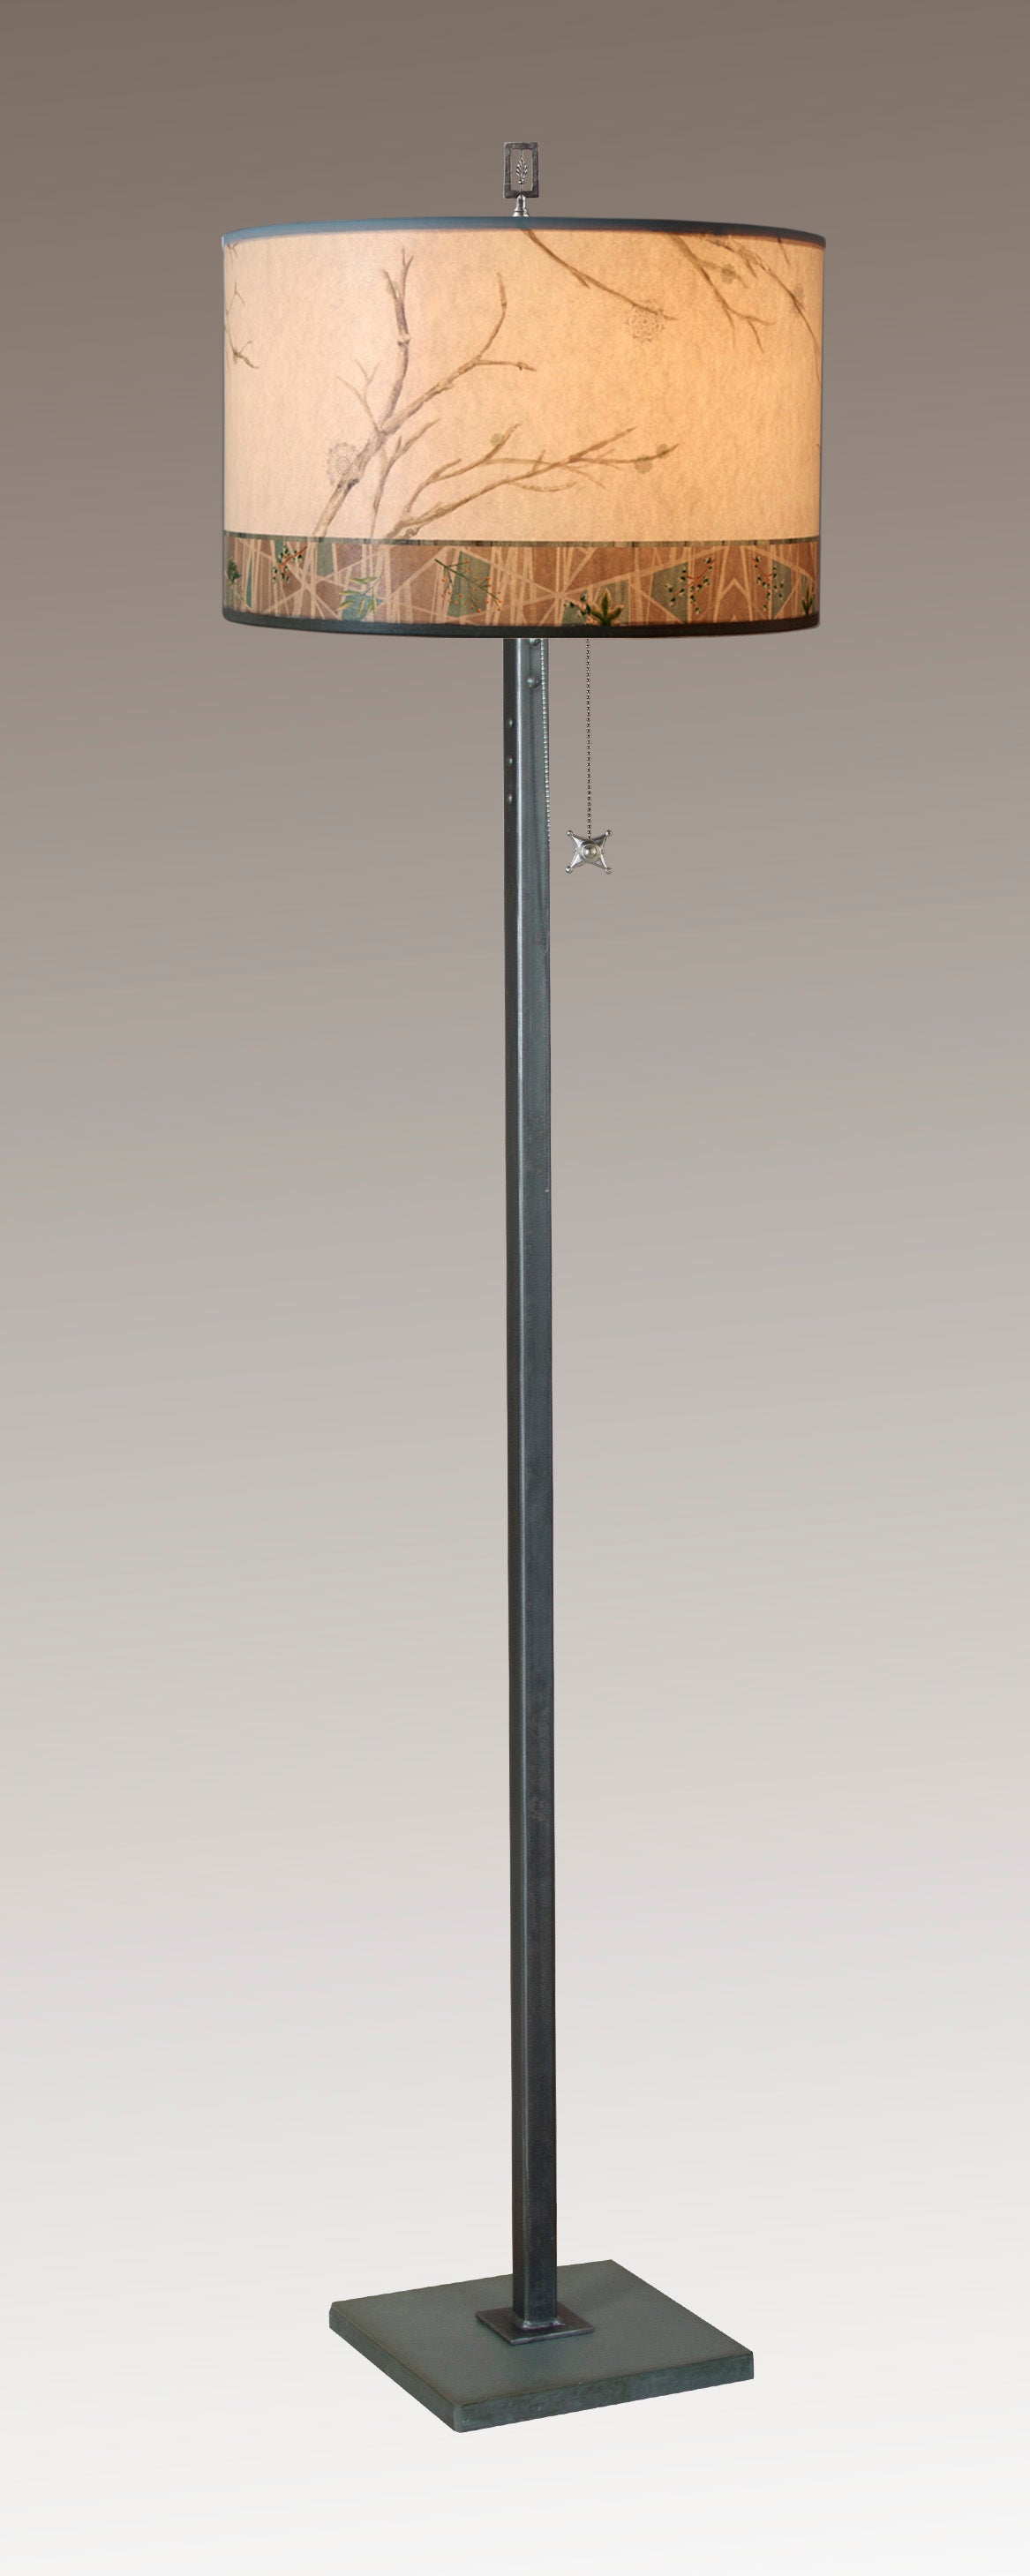 Steel Floor Lamp with Large Drum Shade in Prism Branch